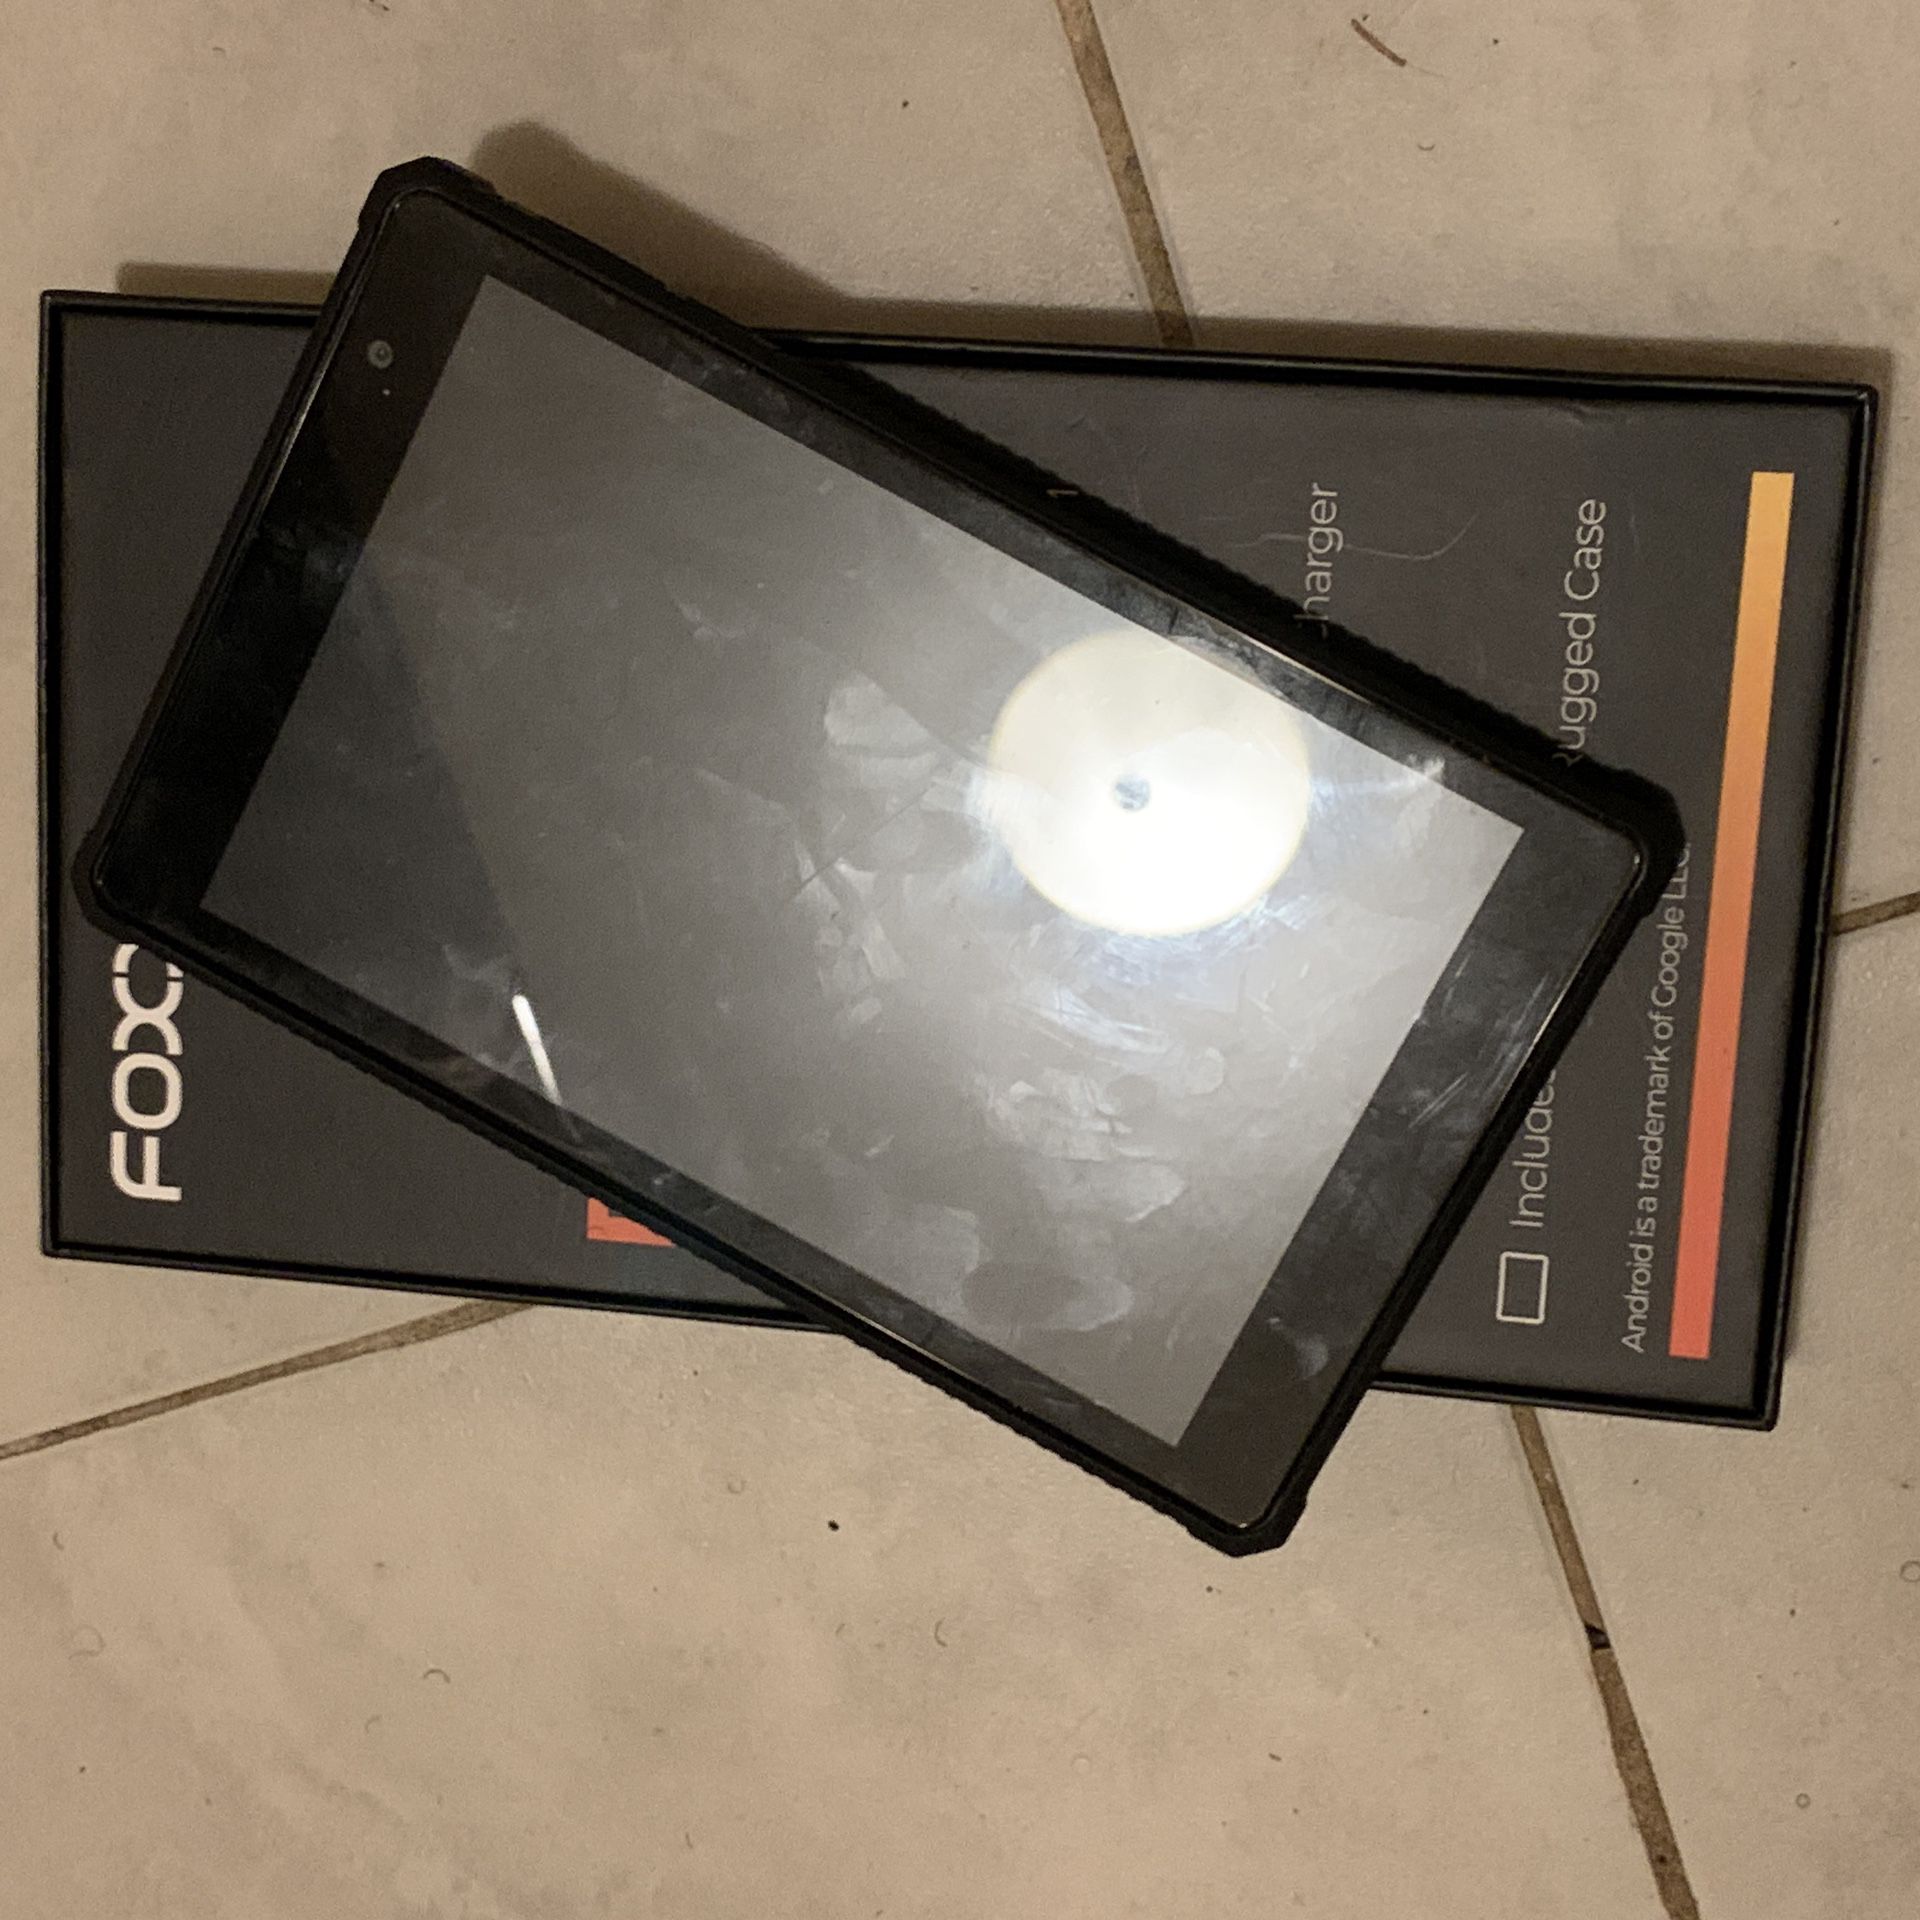 P8 Android Tablet